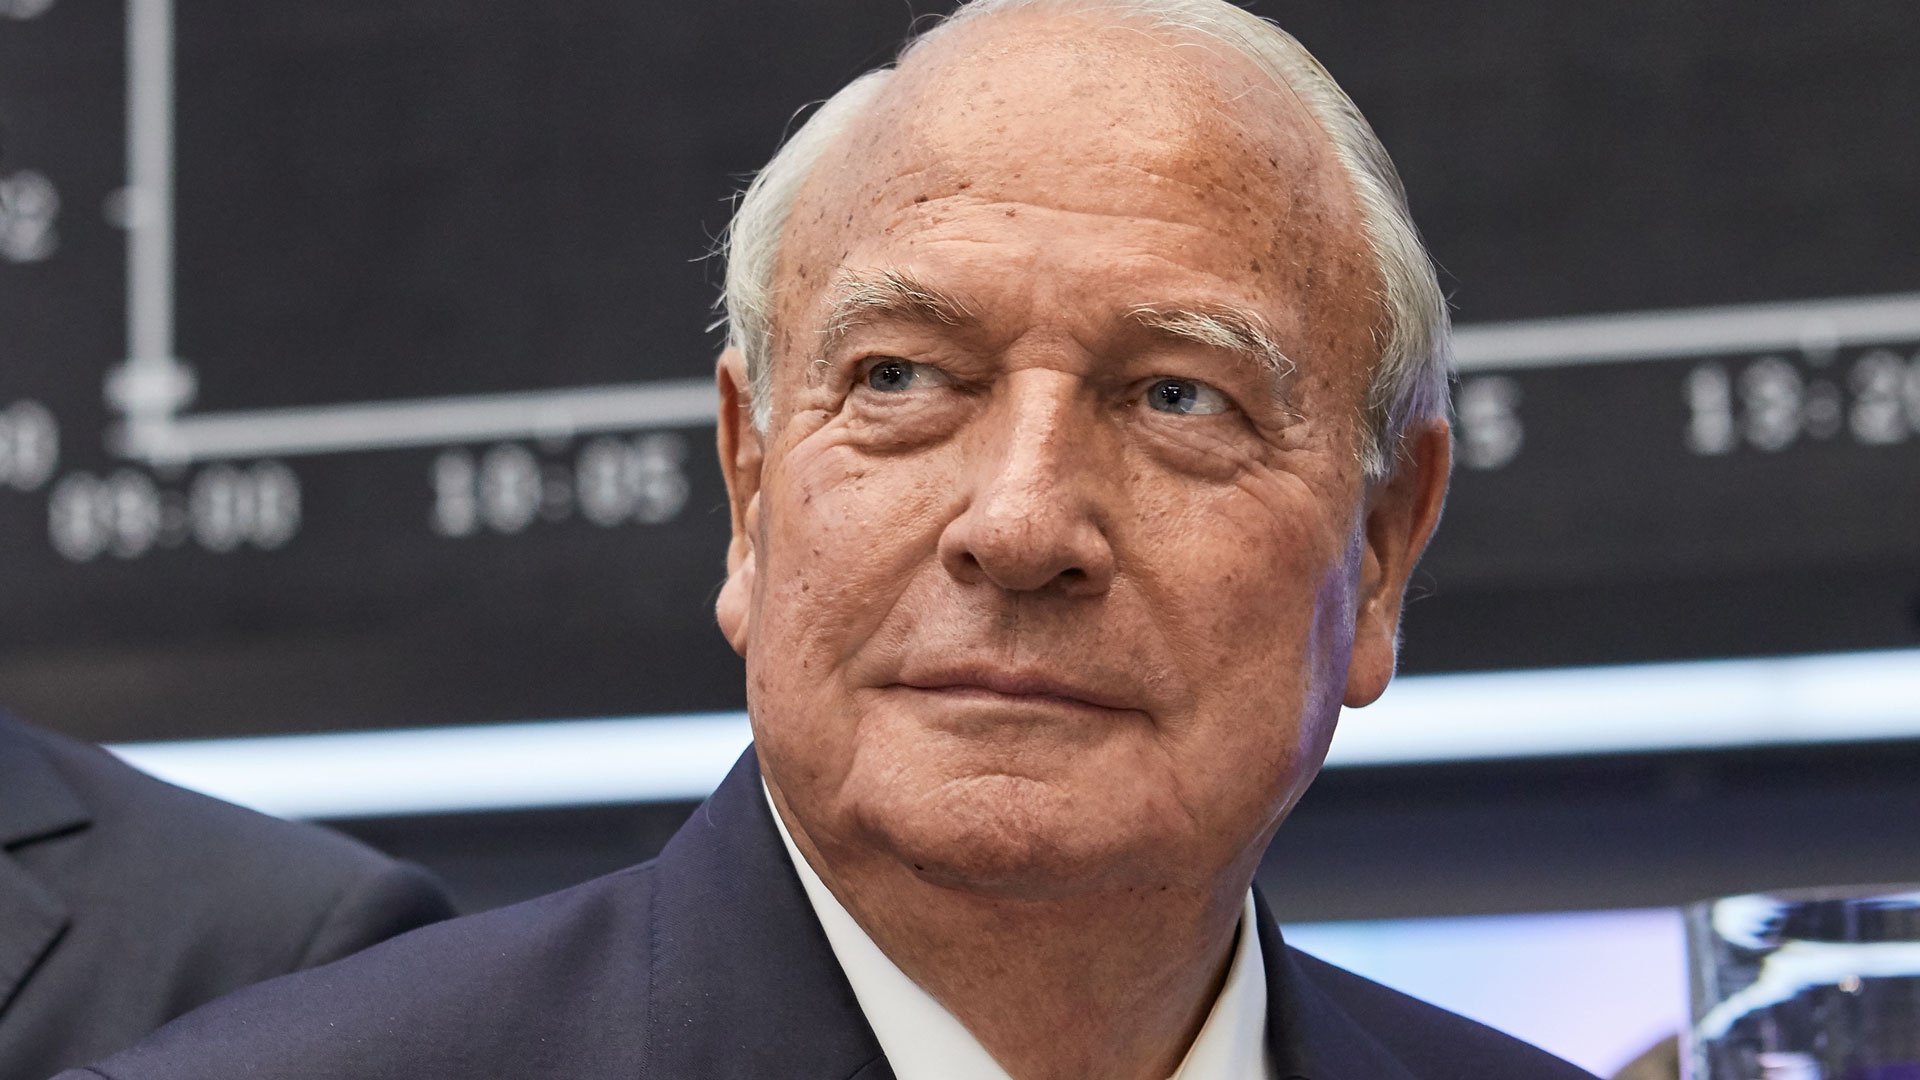 On the day of Knorr-Bremse's IPO, Heinz Hermann Thiele meditatively wallows in thoughts on the trading floor.